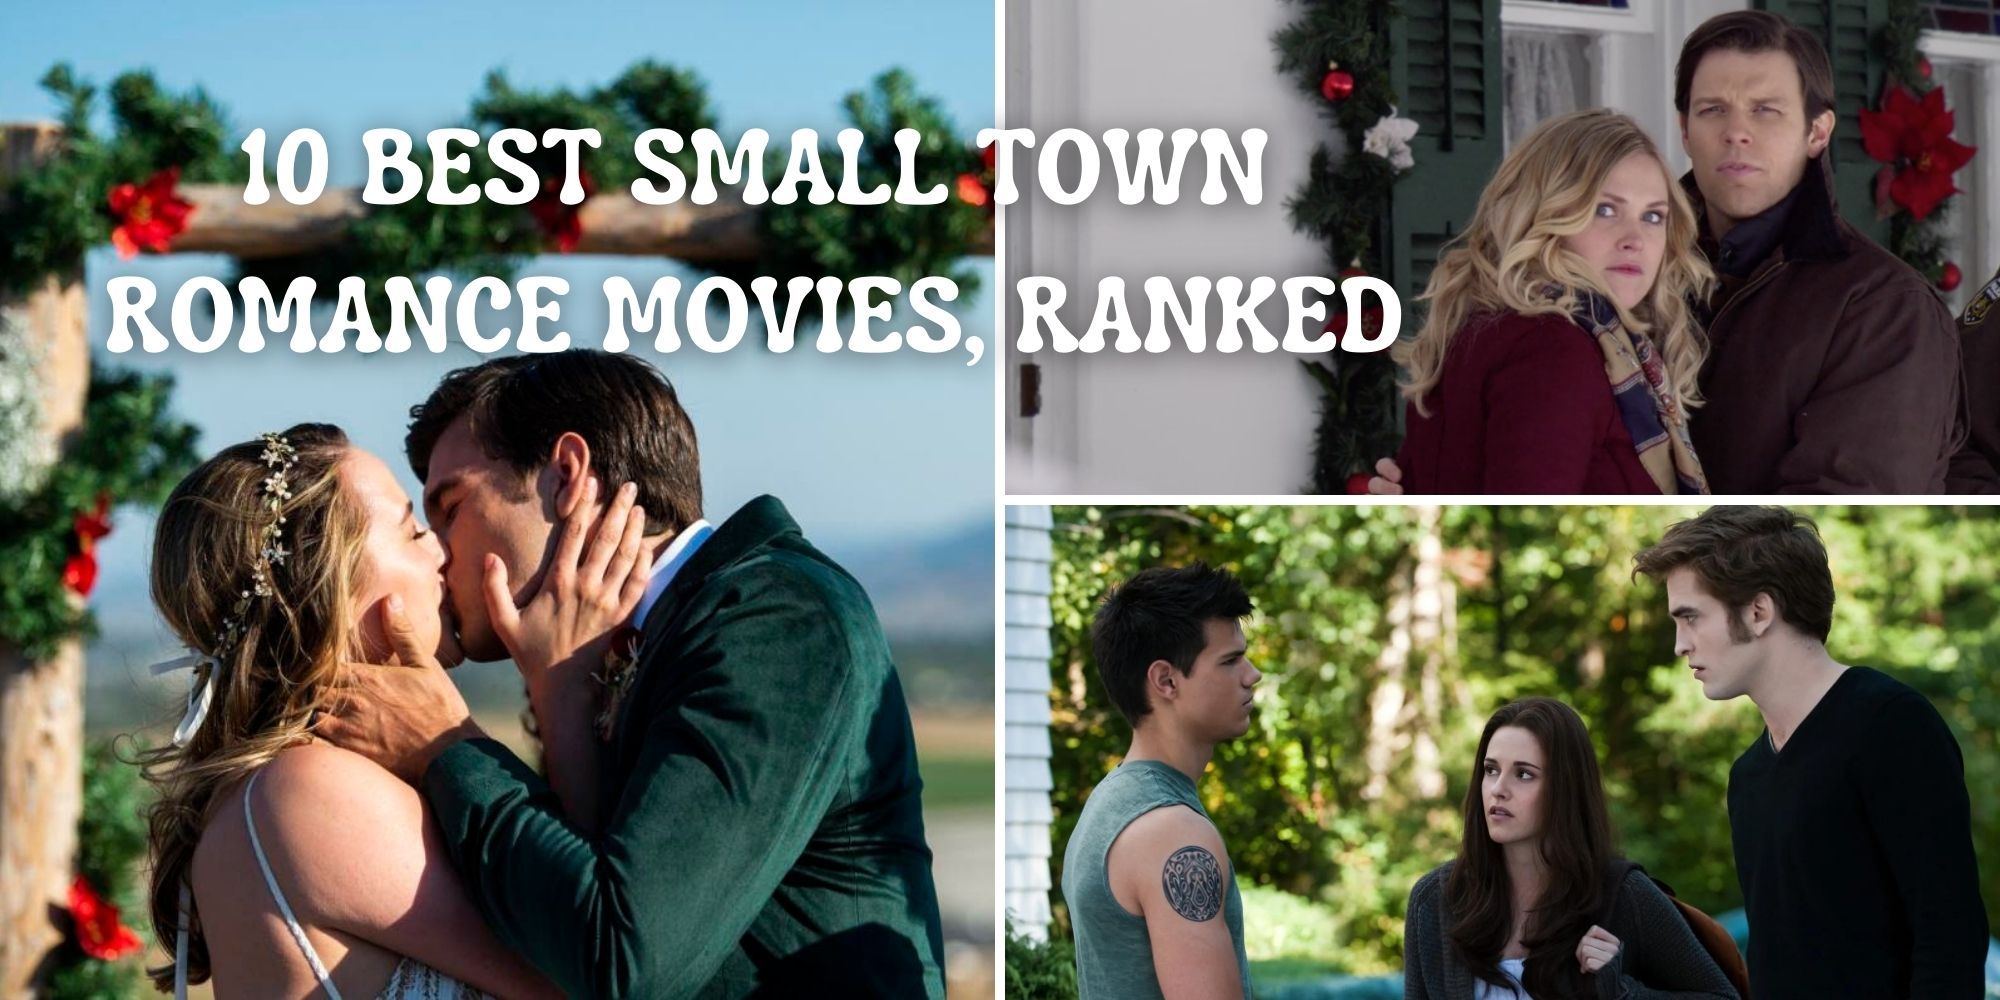 10 Best Small Town Romance Movies, Ranked